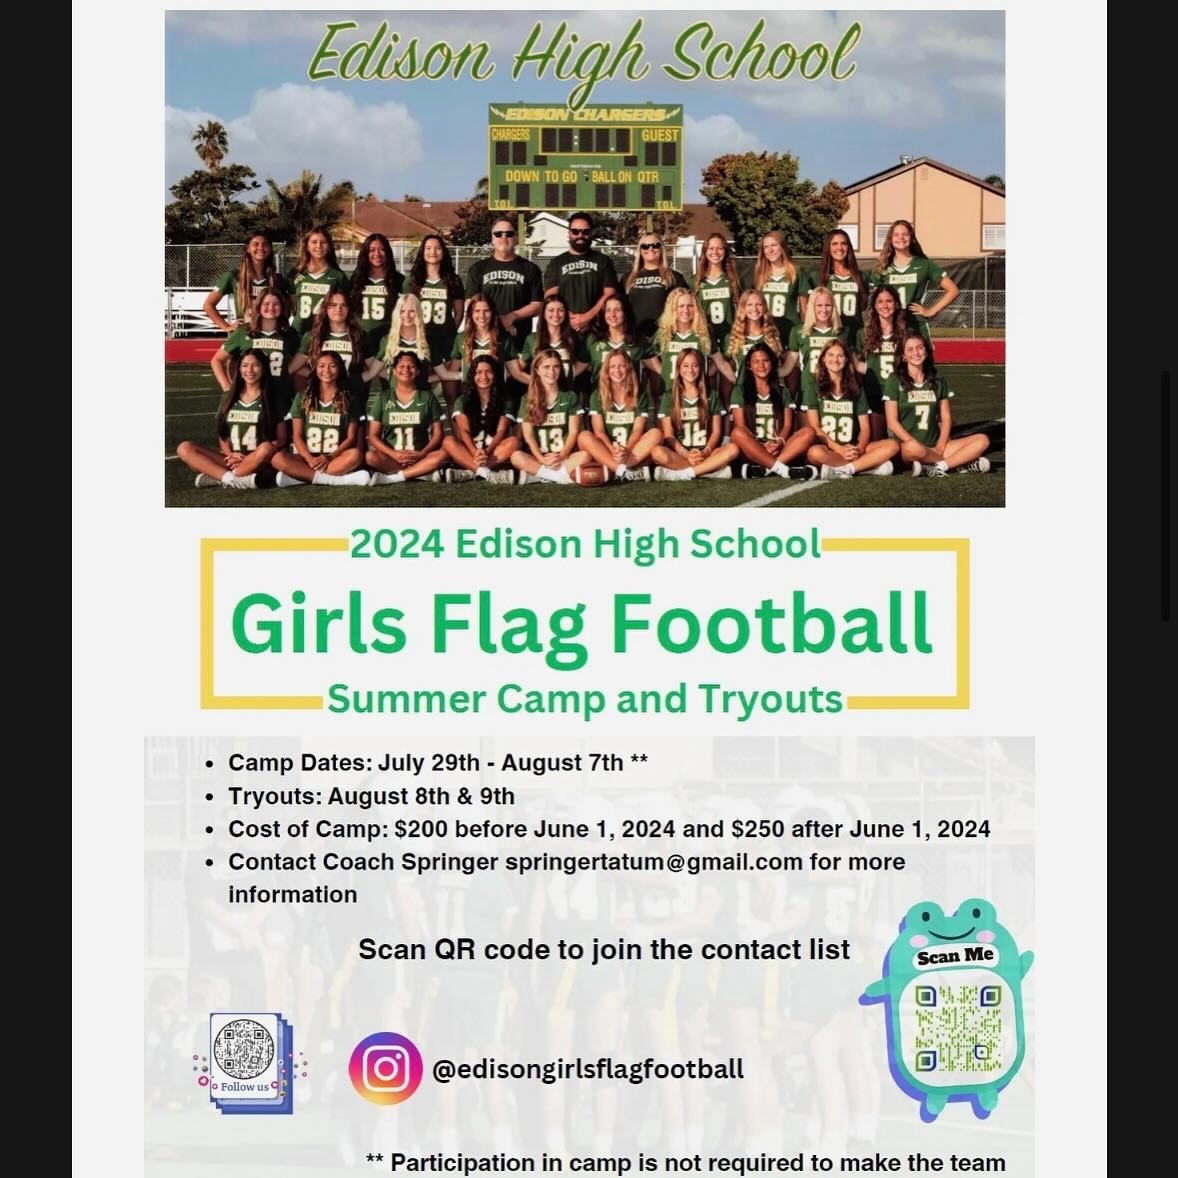 Attention 8th Grade Girls Flag Football Players!! 🏈

Click the link below or scan the QR code to get more info on the Edison Flag Football Camp July 29-Aug 7!!

https://edisongirlsflagfootball.com/f/2024-summer-camp-and-tryouts